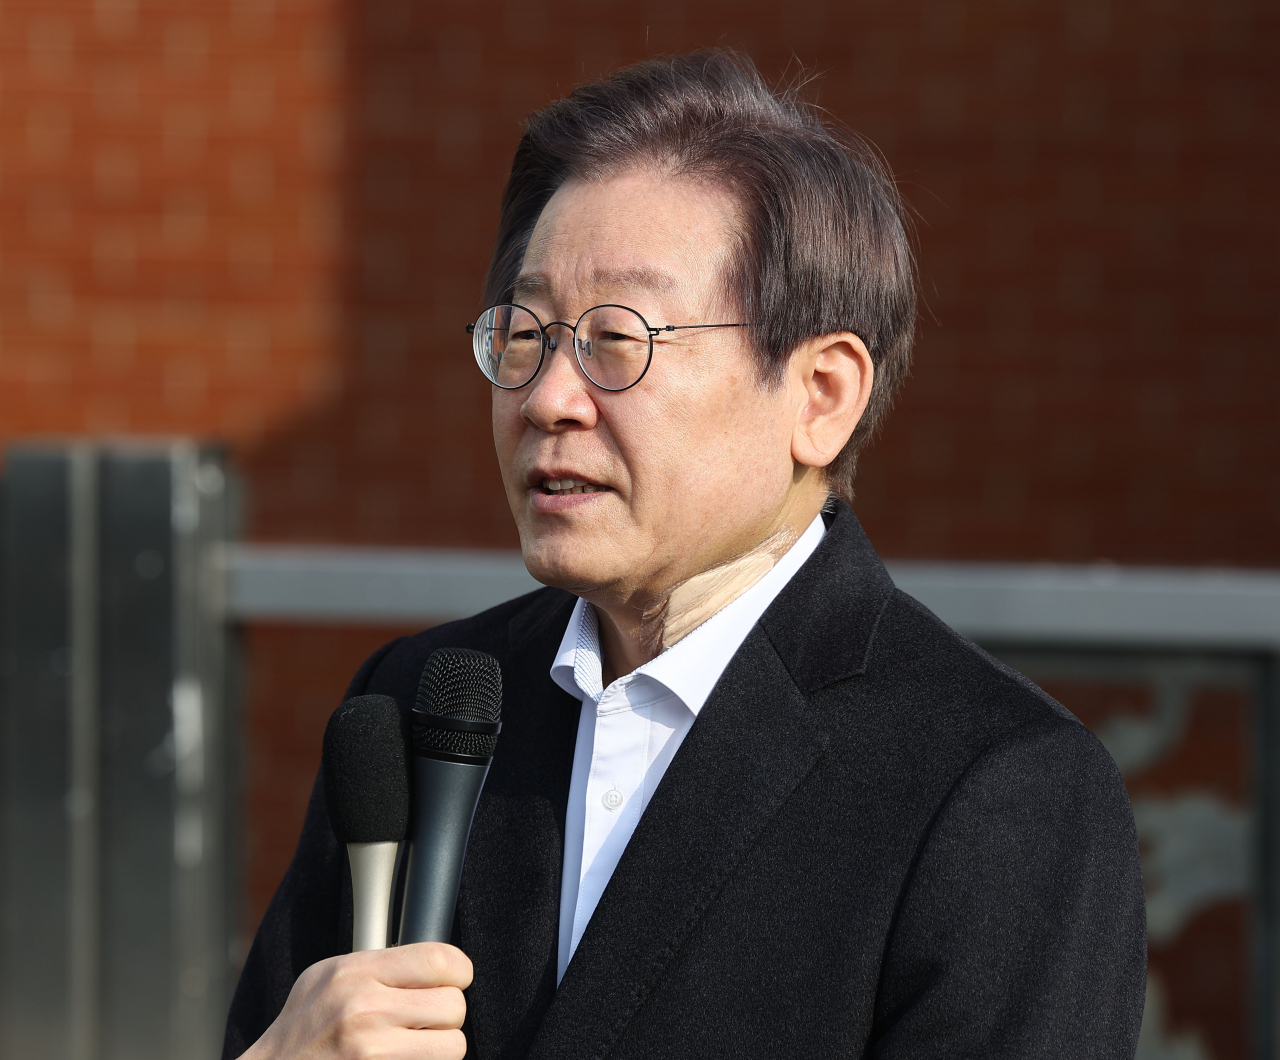 Rep. Lee Jae-myung, the leader of the main opposition Democratic Party, speaks to reporters in front of Seoul National University Hospital on Wednesday, eight days after he underwent surgery on a knife wound sustained in an attack. (Yonhap)